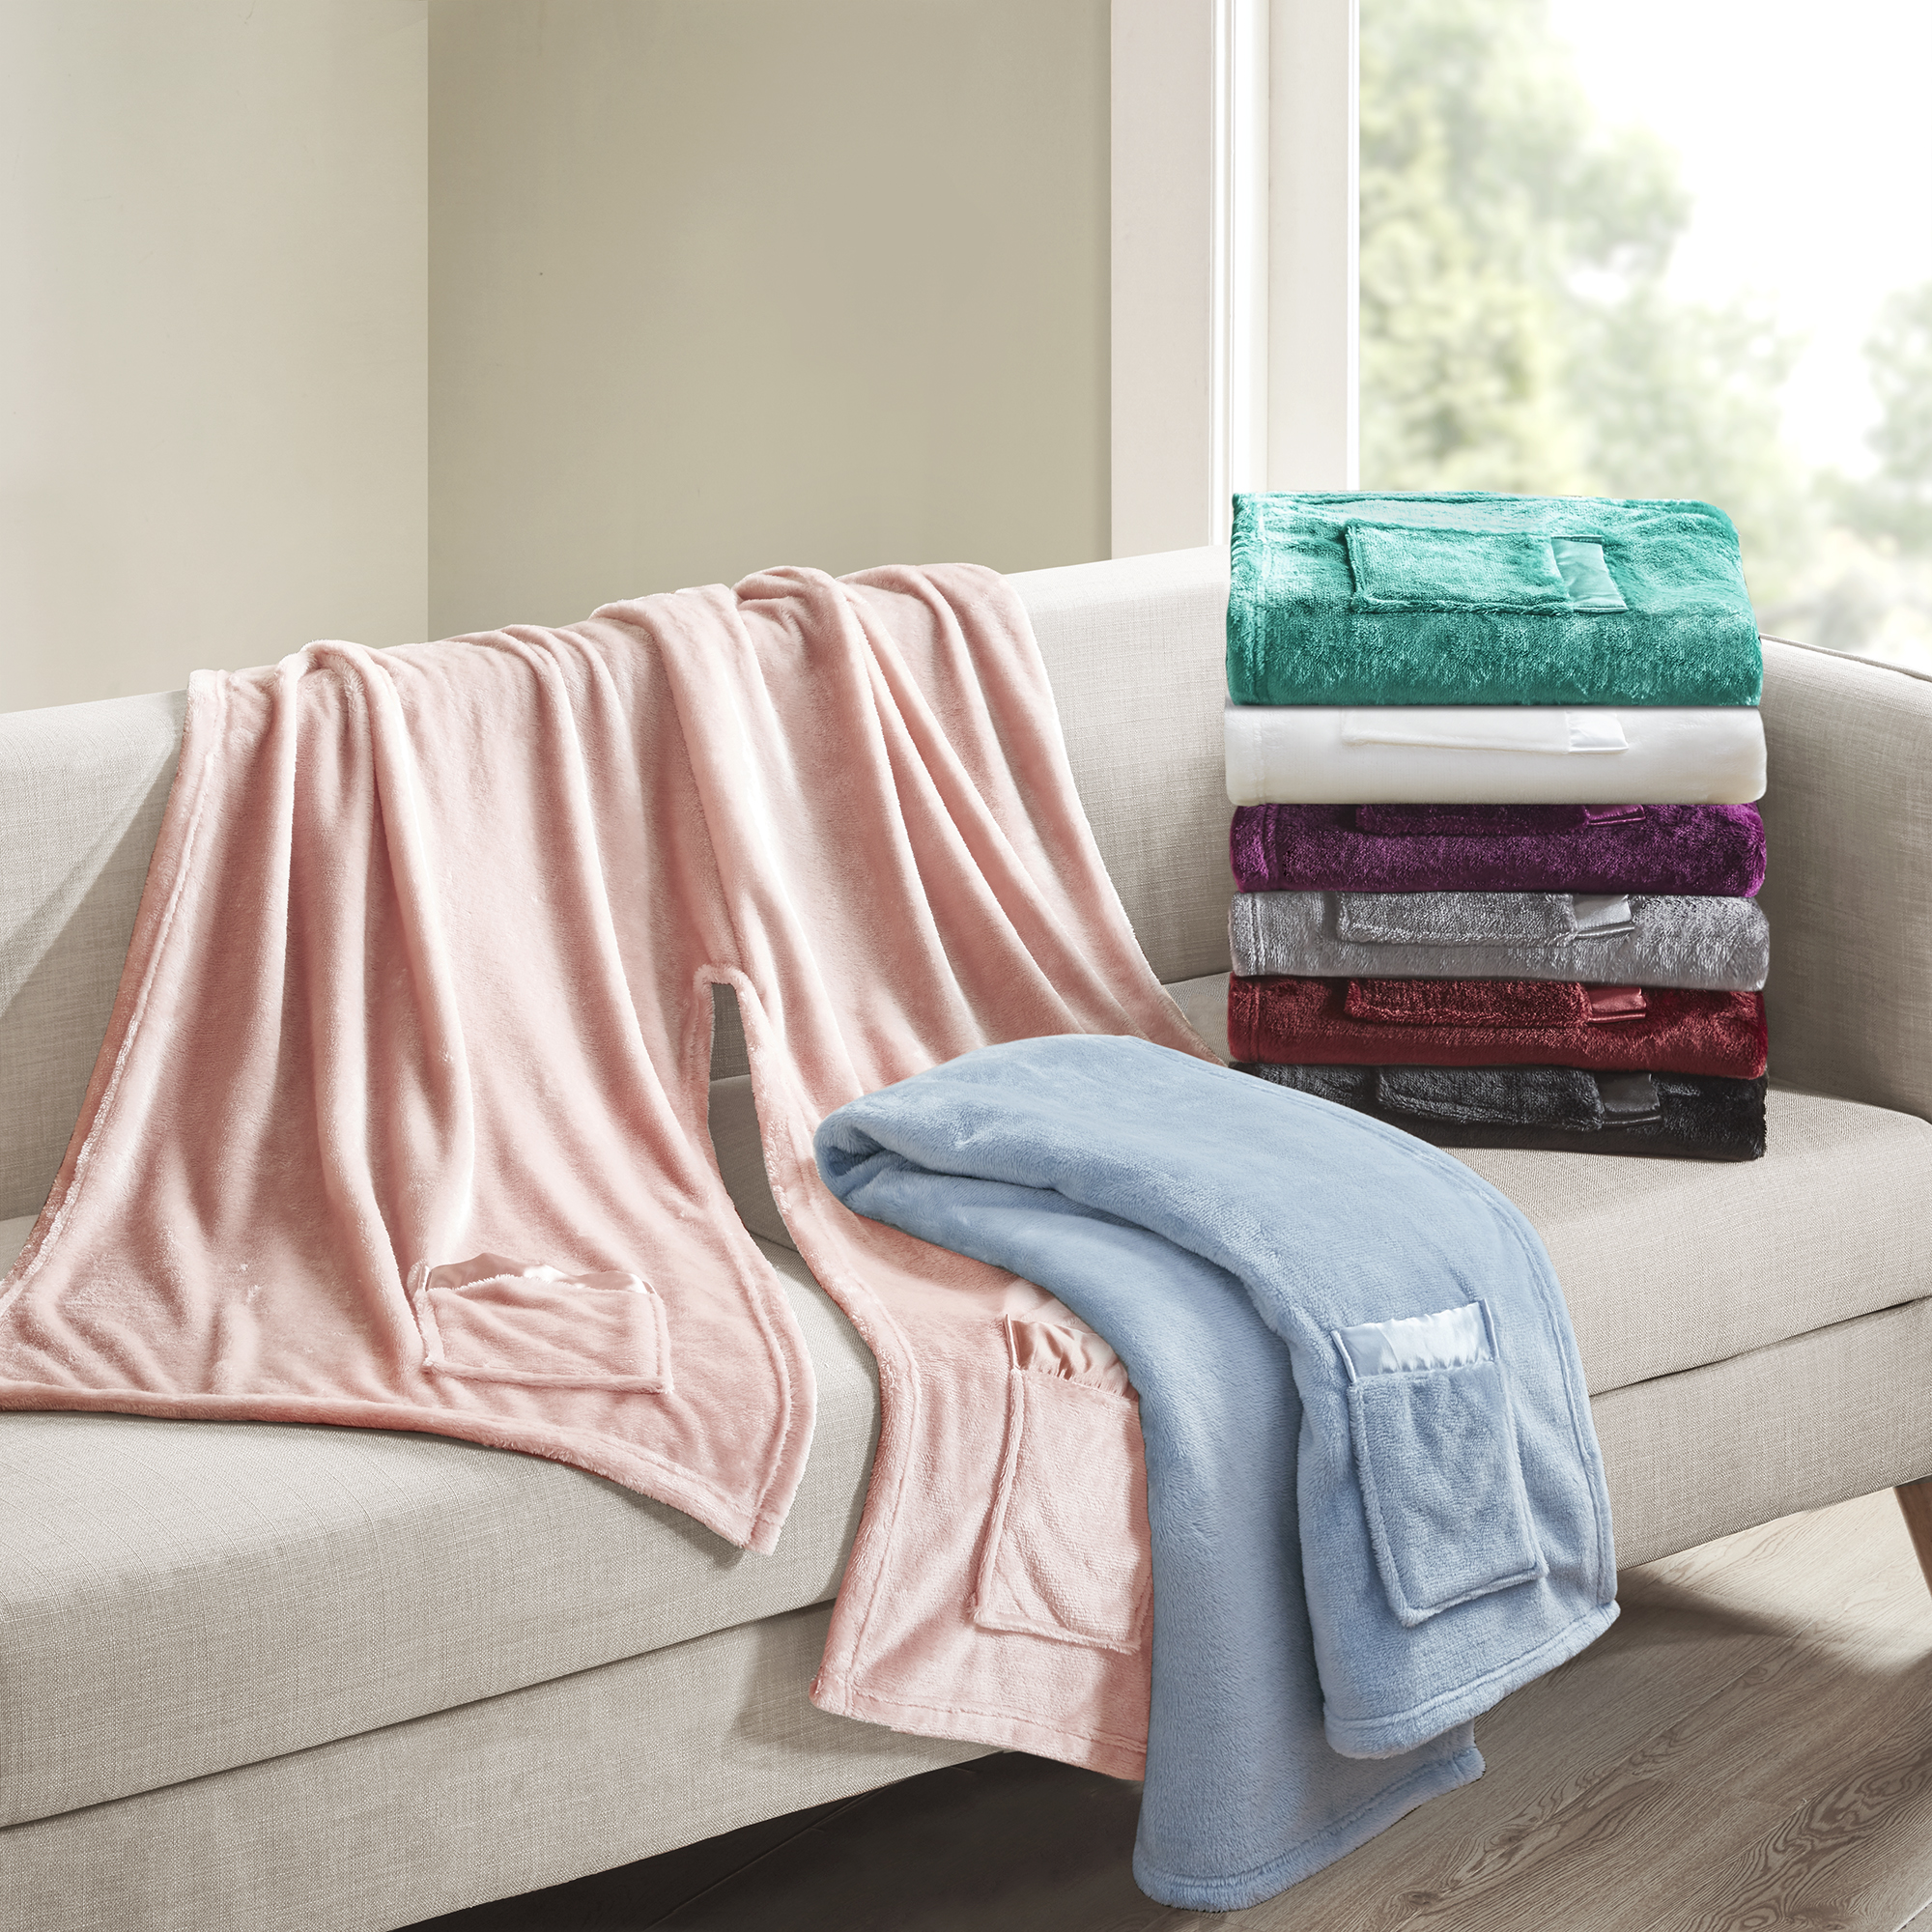 Giftable and Wearable Angel Wrap Plush Throw Blanket with Pockets, Gray - image 3 of 5